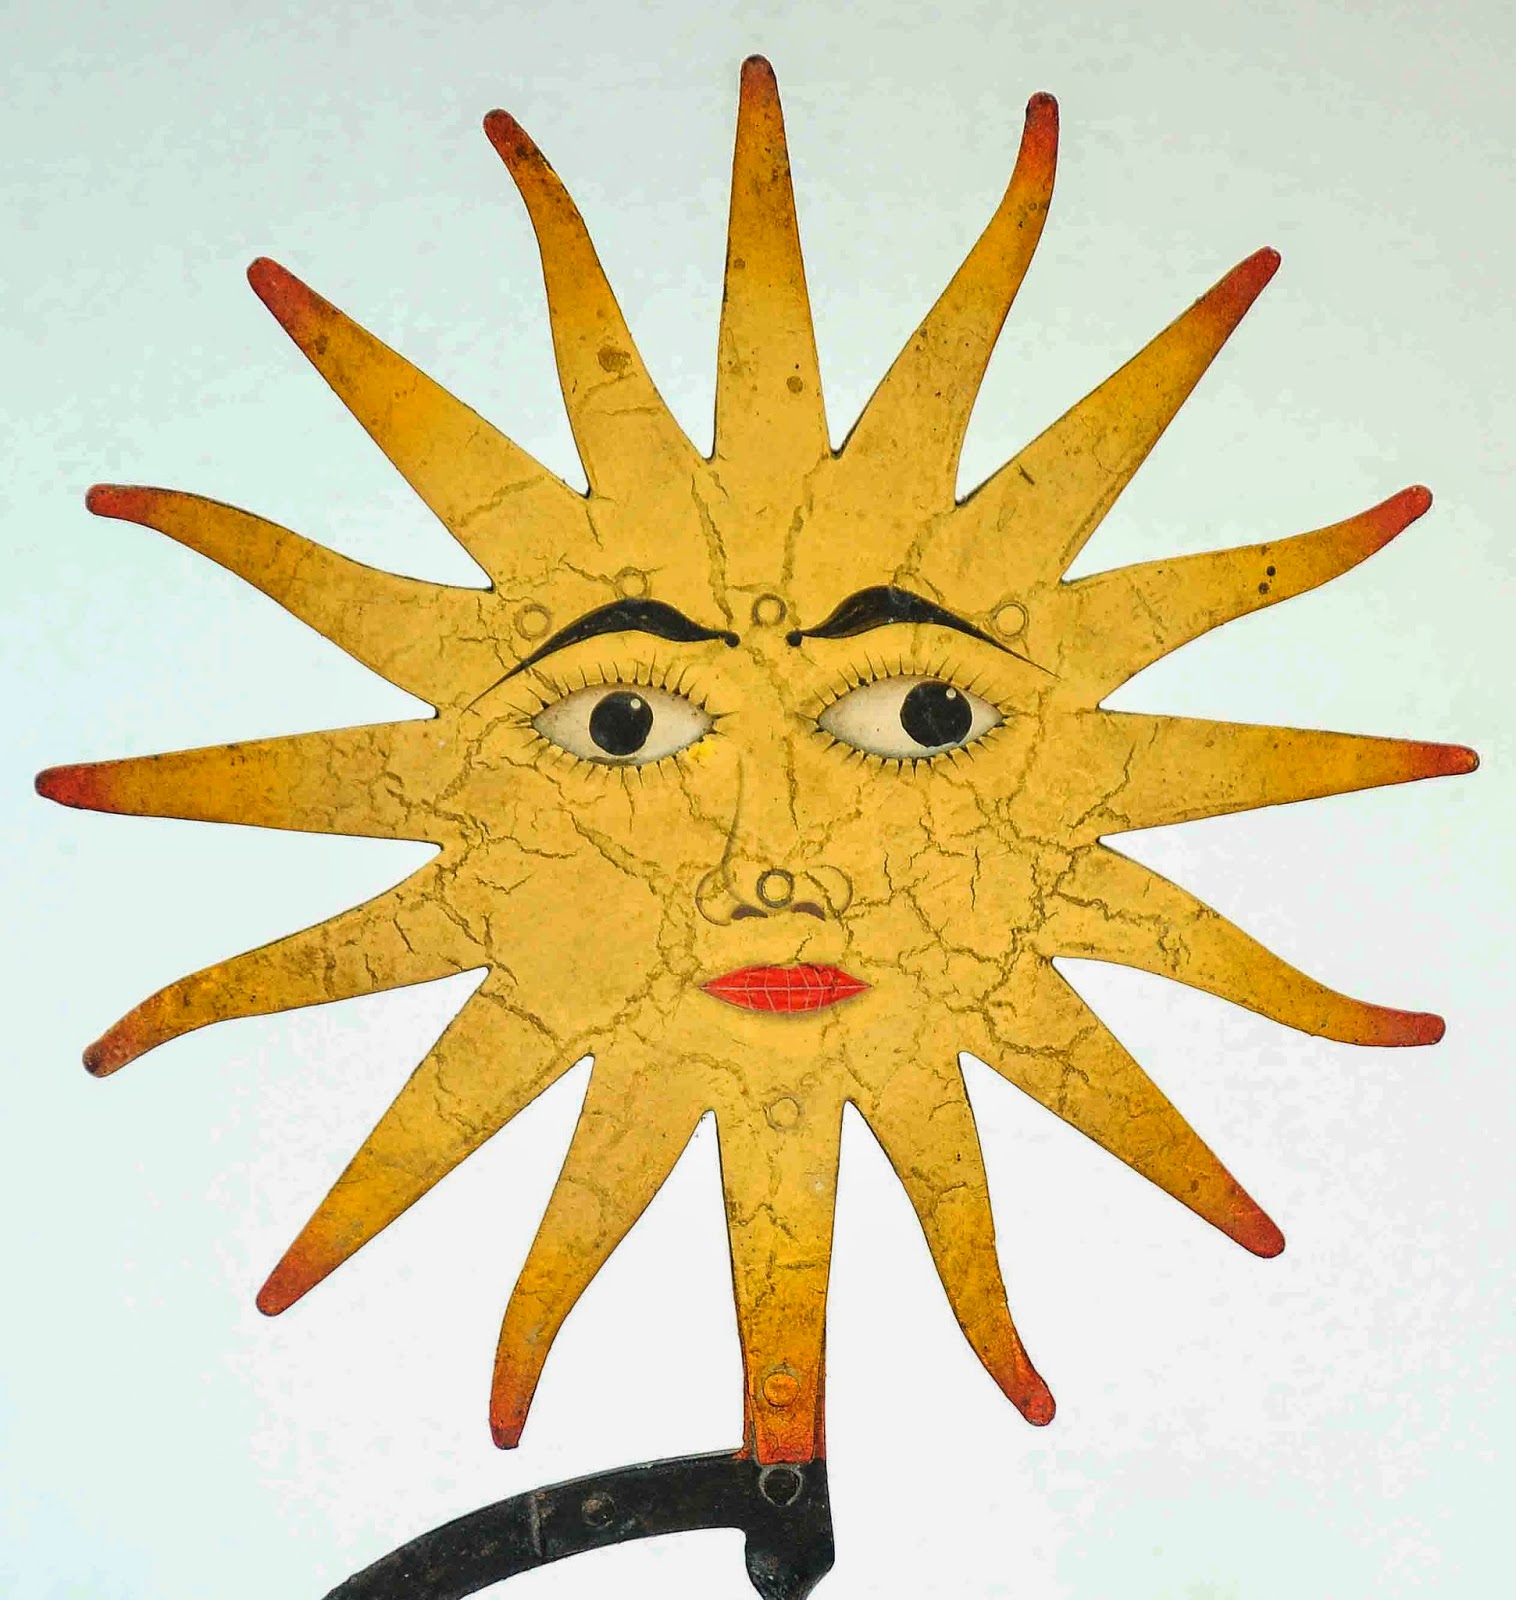 Old Vintage Gallery: Antique Sun Balancing Toy